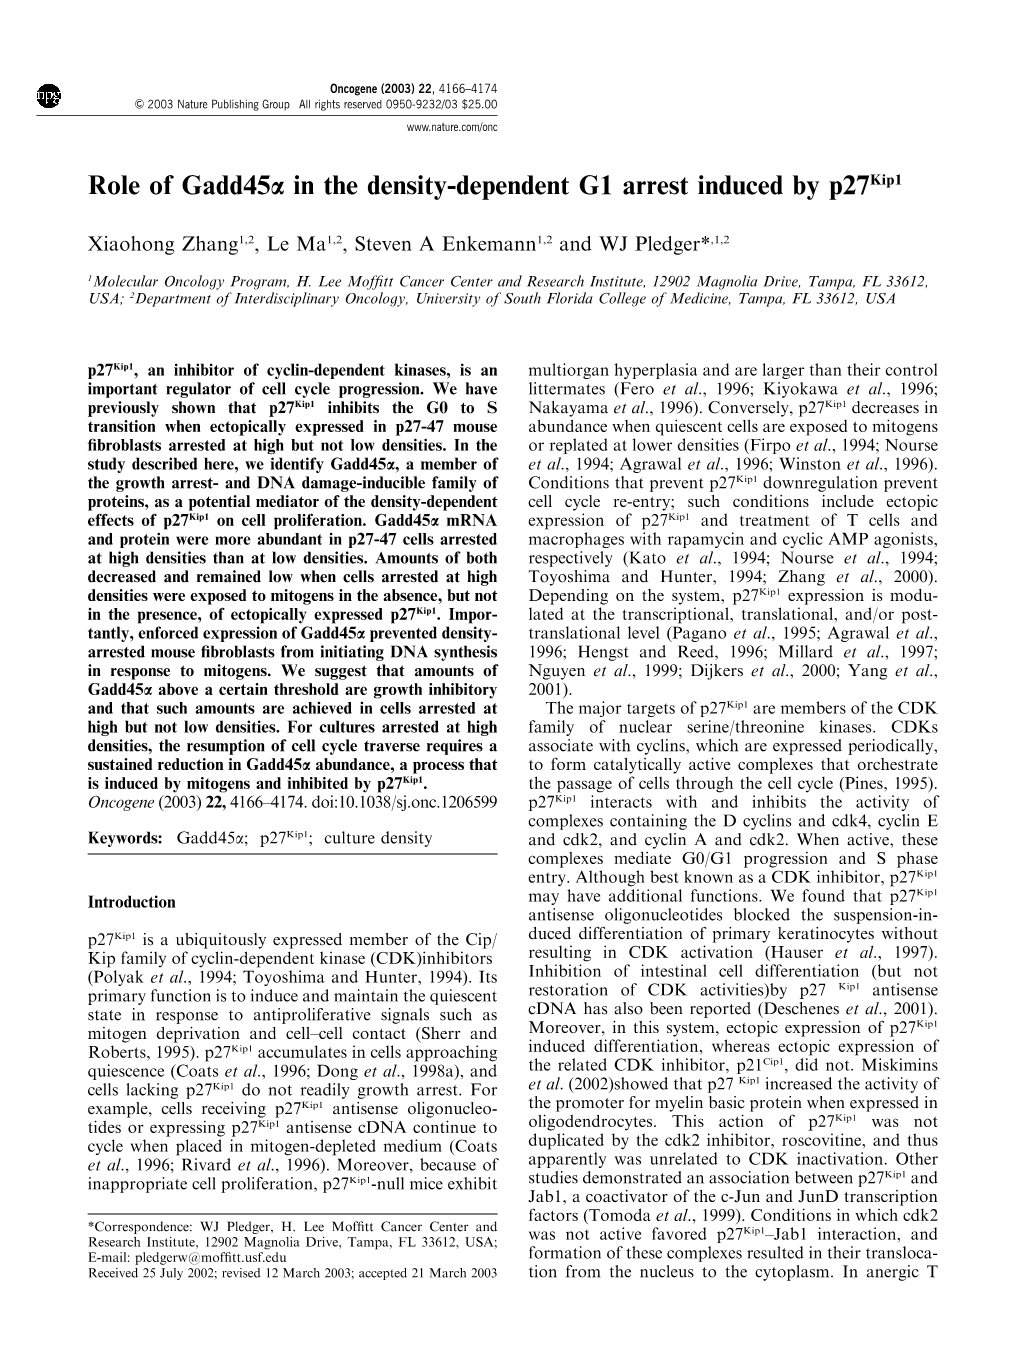 Role of Gadd45a in the Density-Dependent G1 Arrest Induced by P27kip1